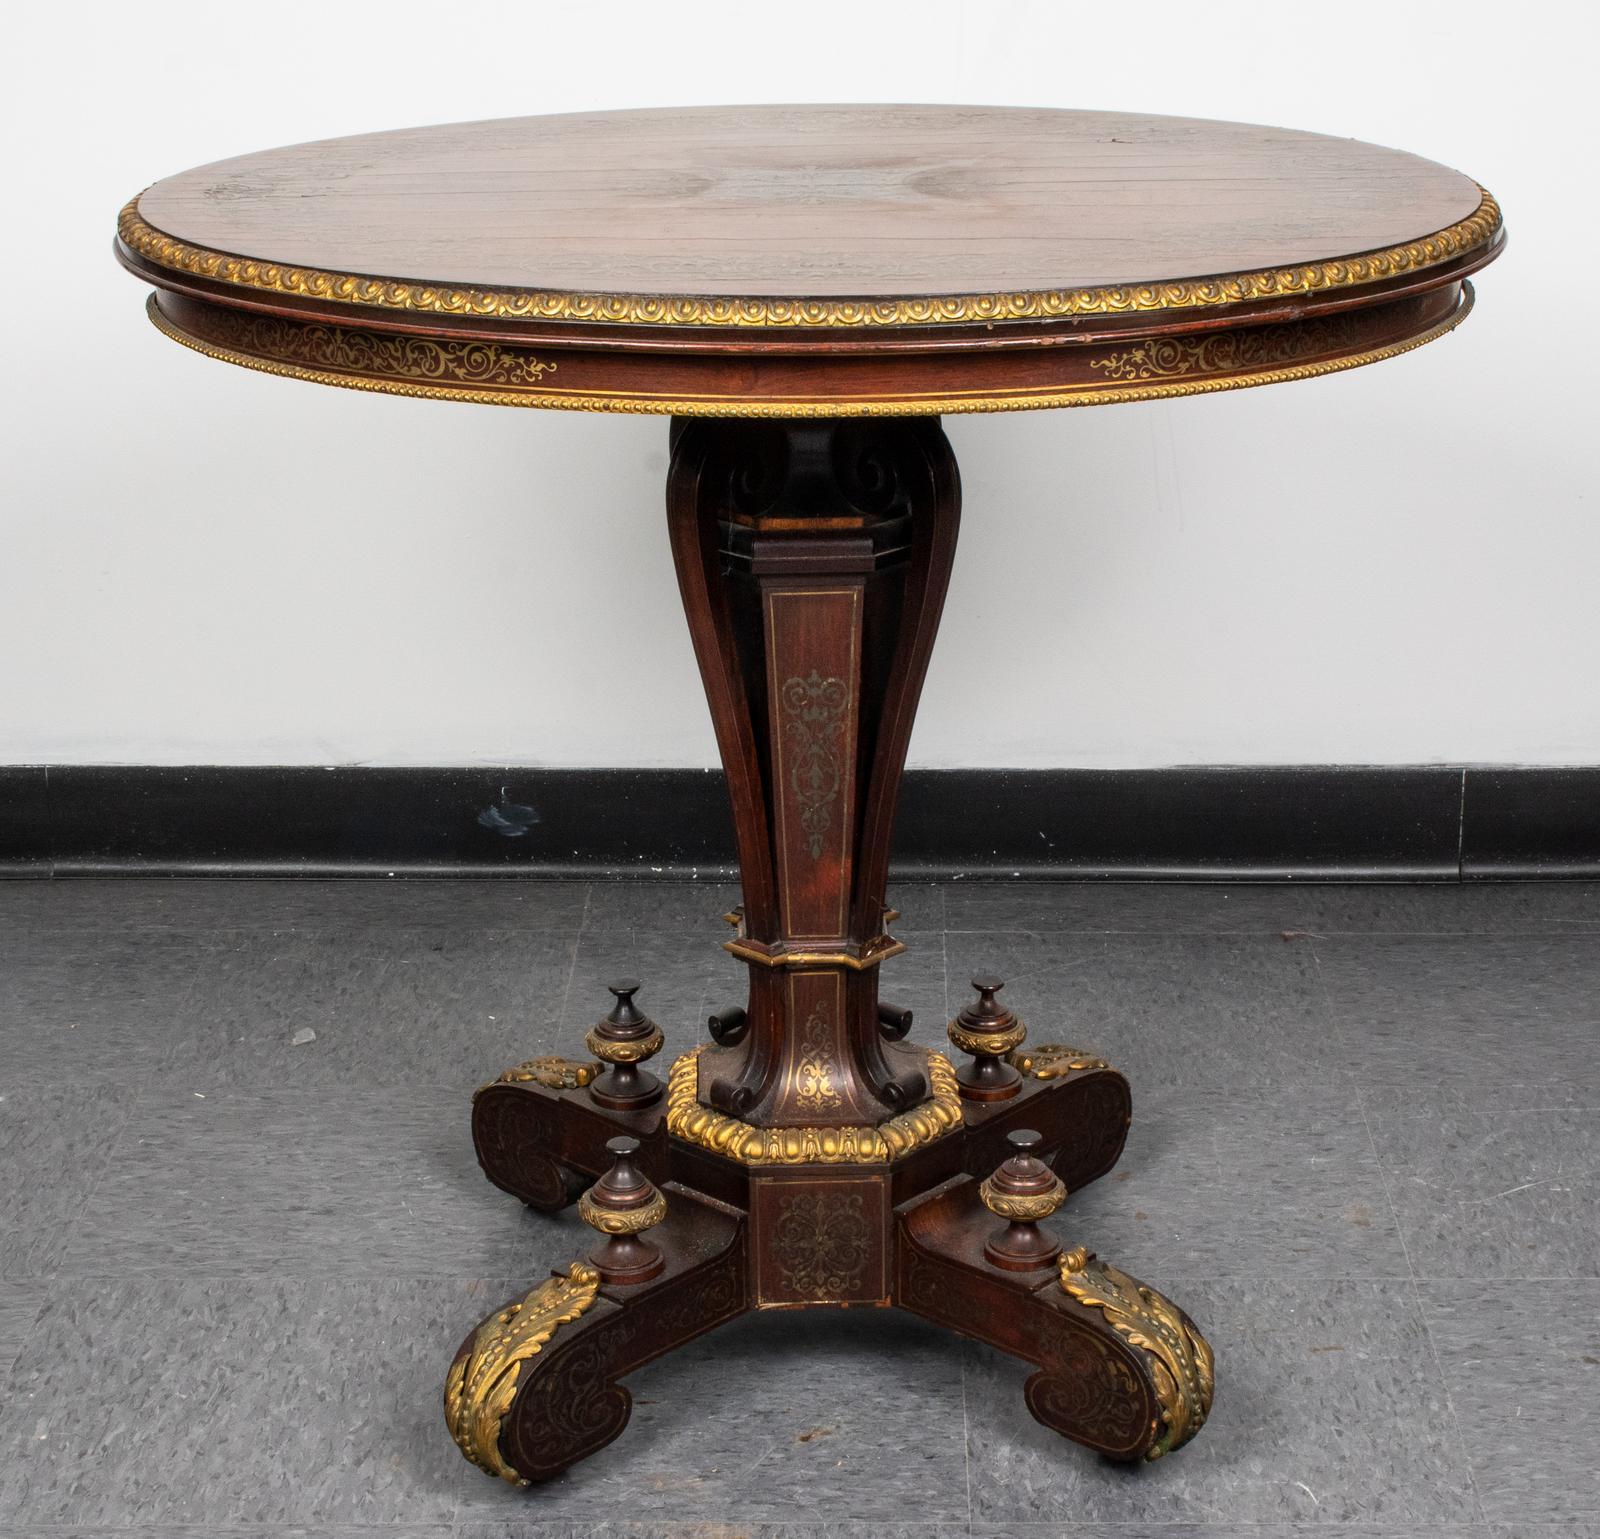 Very fine quality Napoleon III oval side table with boulle marquetry and gilt bronze mounts.